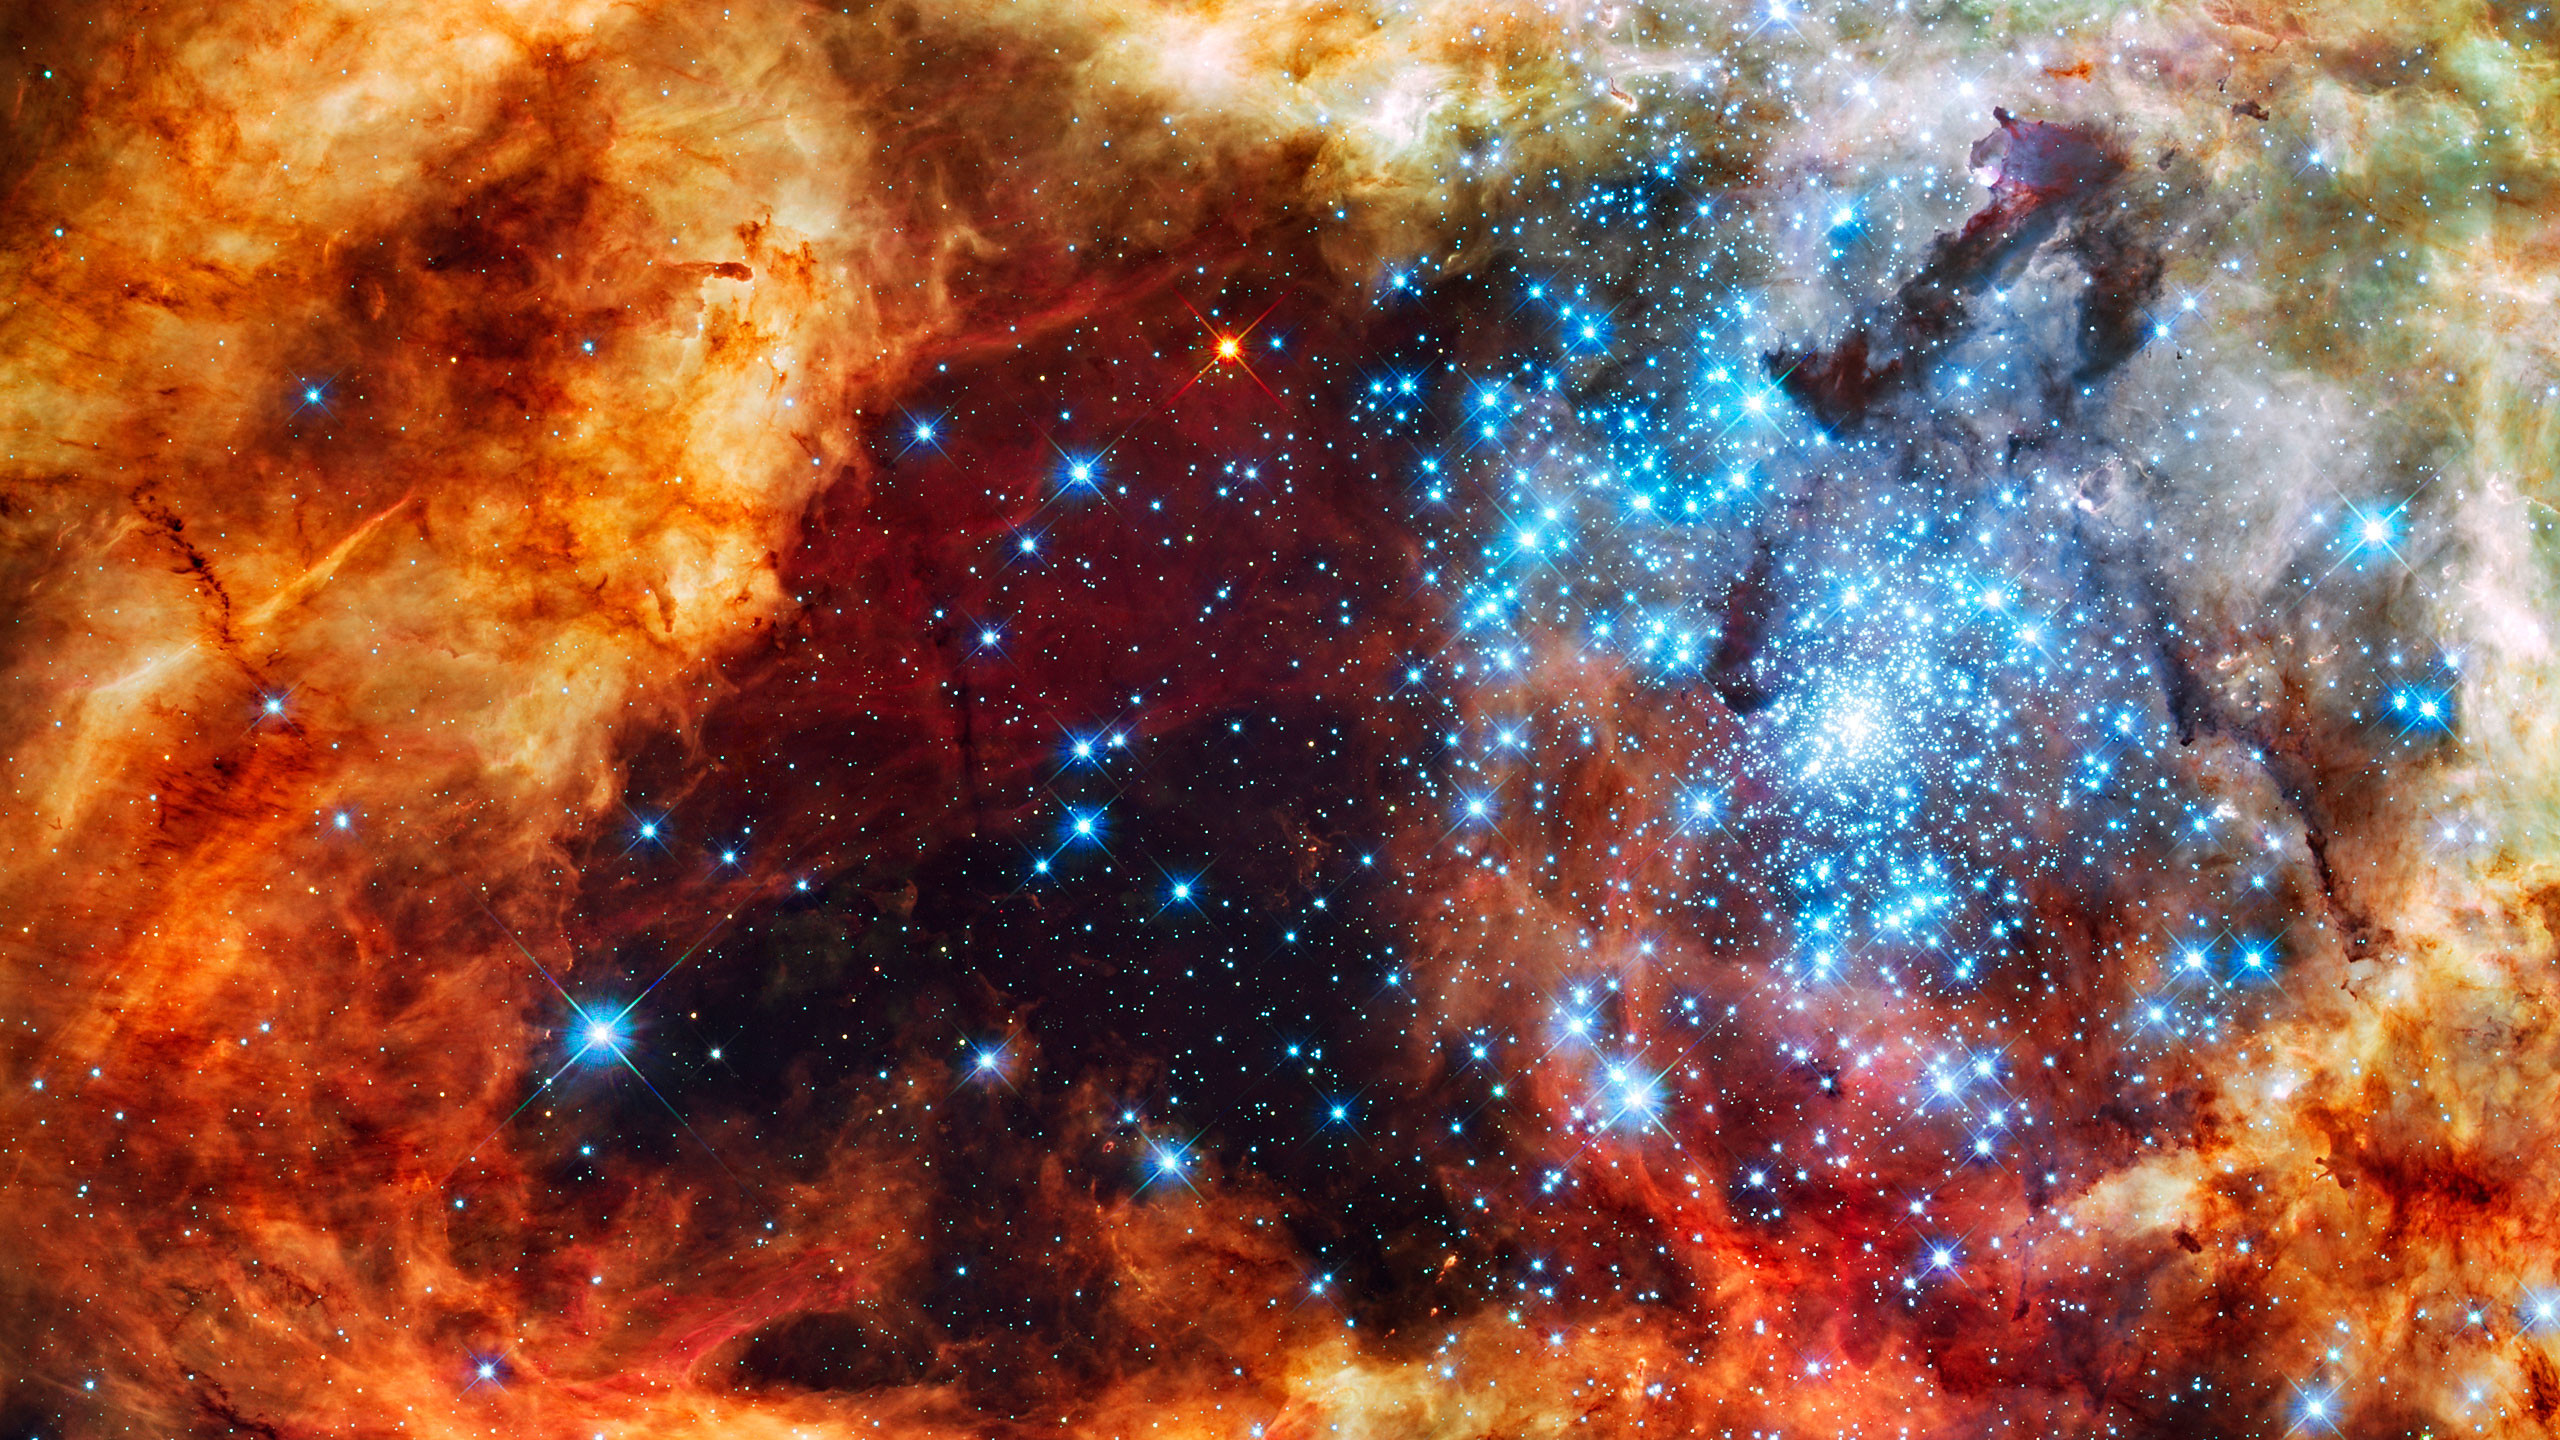 2560x1440 Hubble Wallpapers High Res.